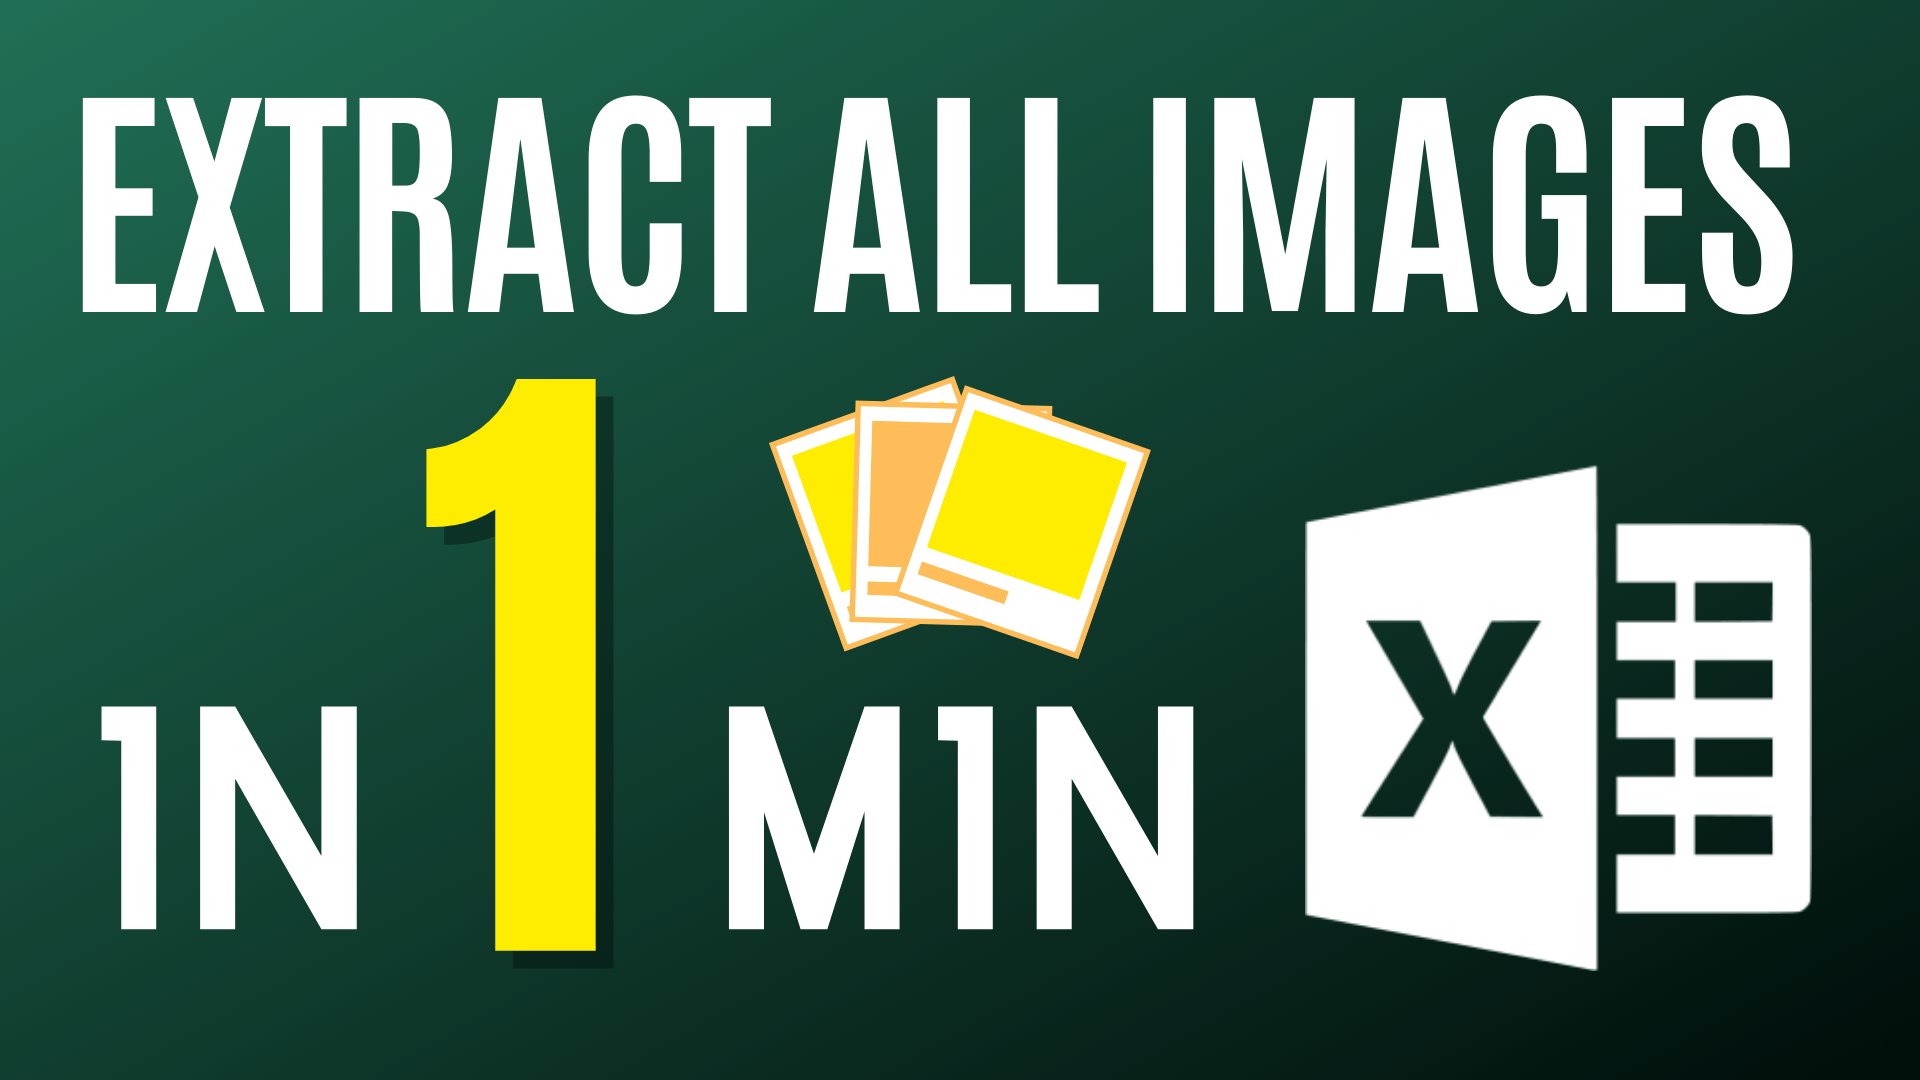 How To Extract Images From Excel In 1 Minute